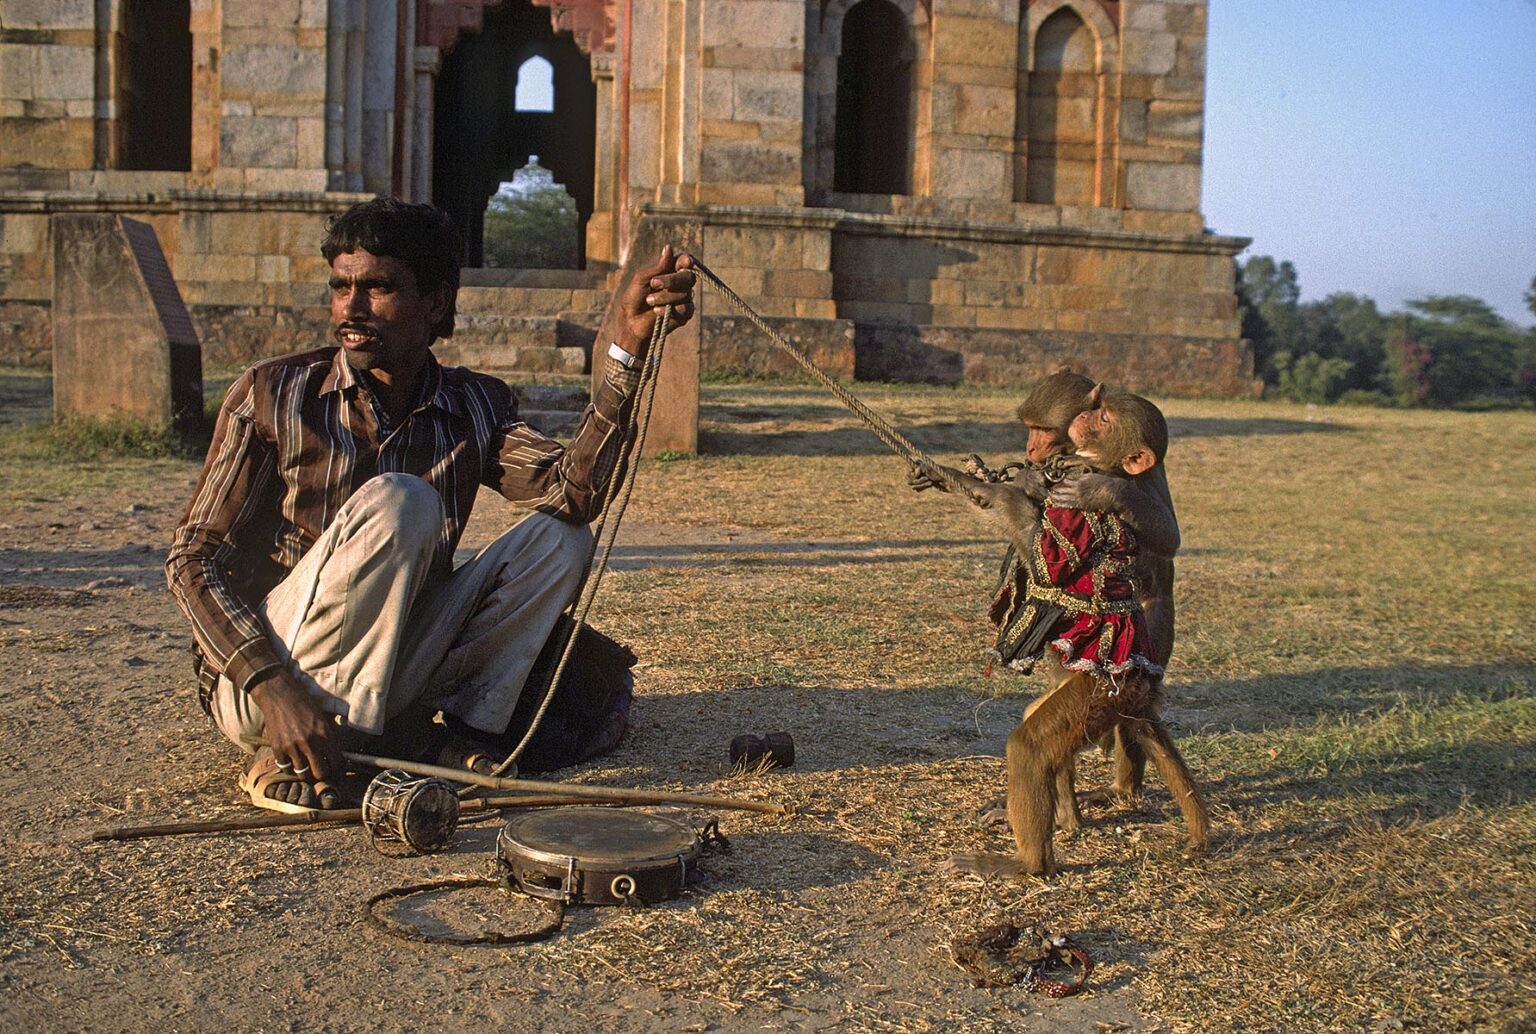 MAN and his PERFORMING MONKEYS in the LODI GARDENS - DELHI, INDIA